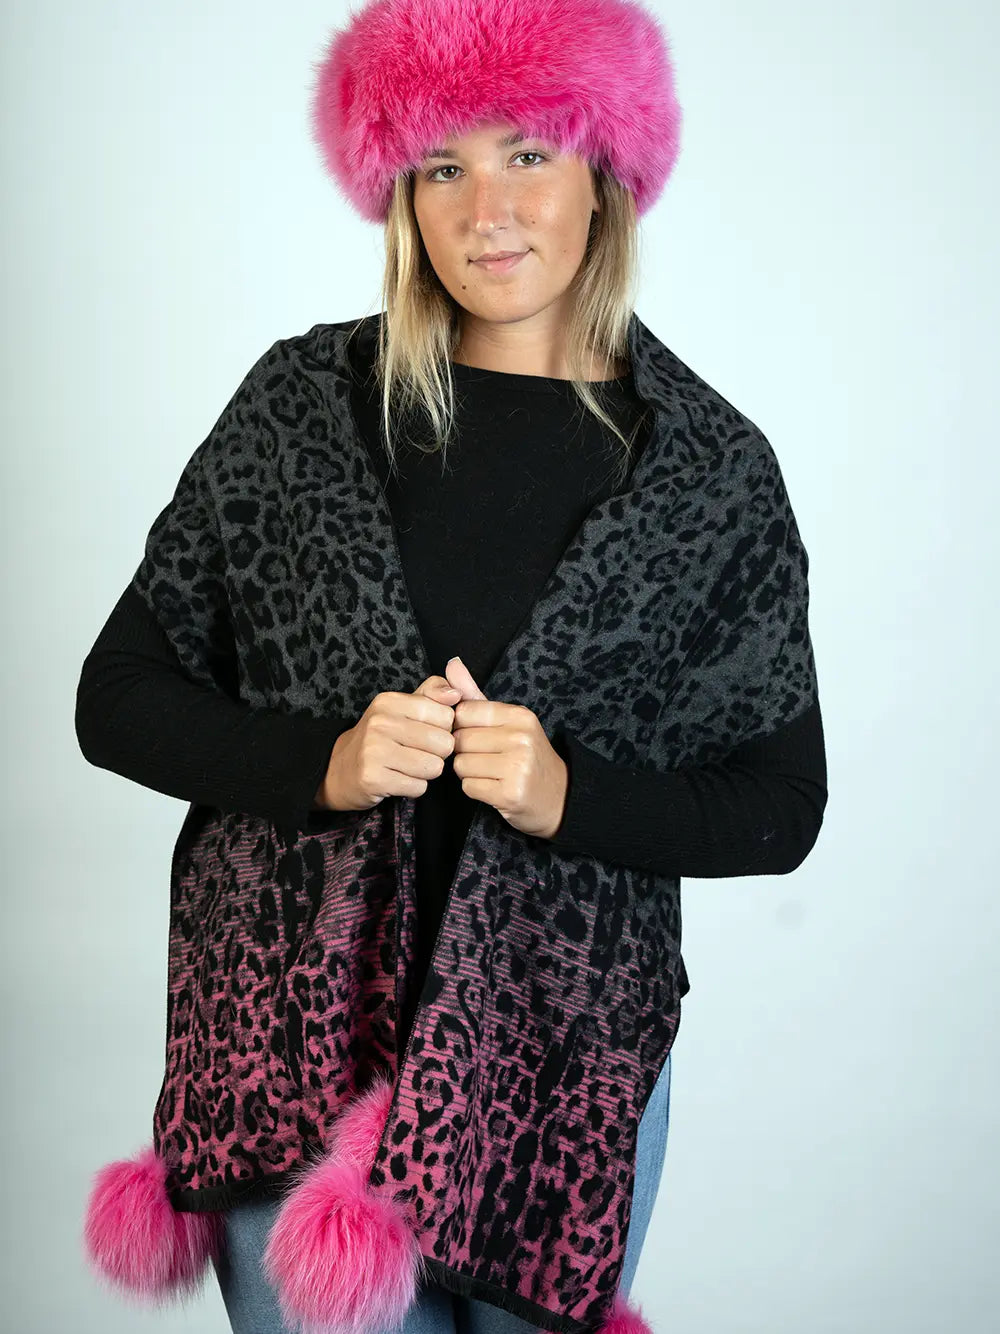 LaBelle New Collections Fushia Woven Leopard Printed Scarf w/ PomPoms